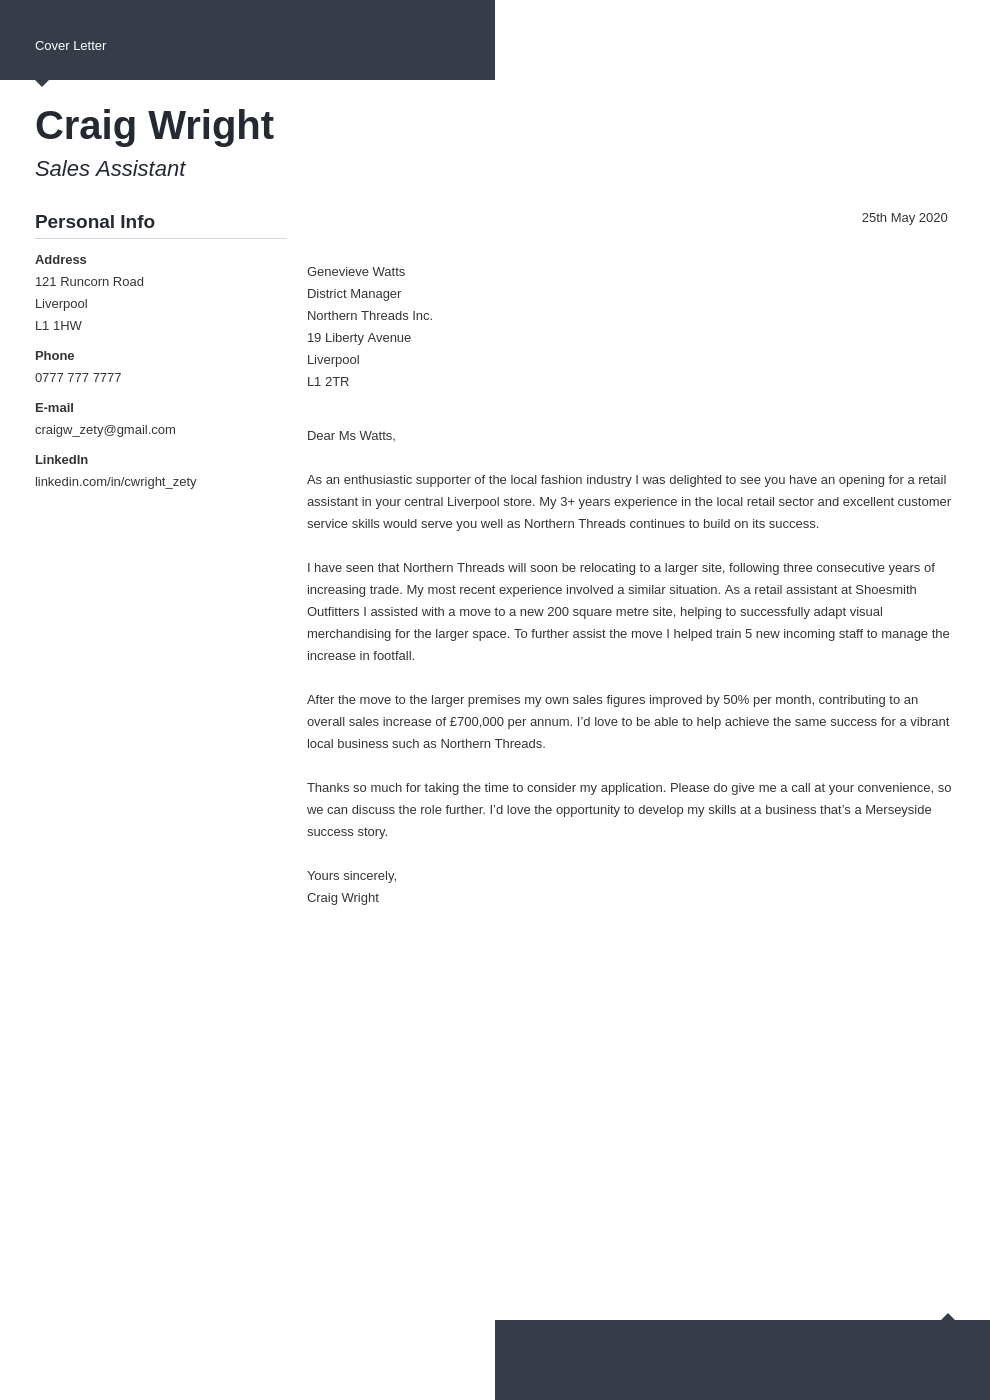 retail cover letter examples uk